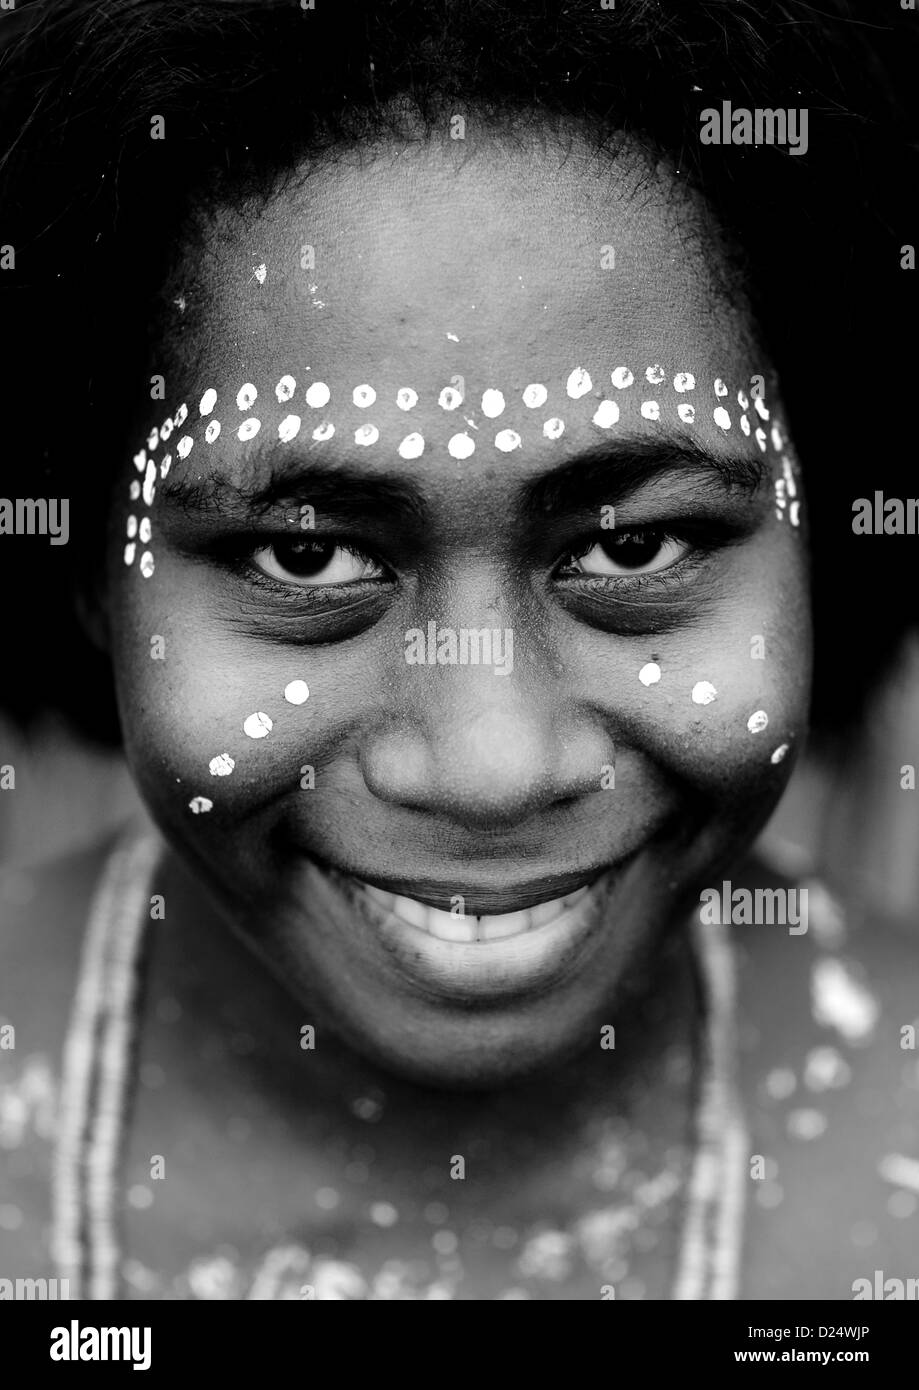 Woman From Autonomous Region Of Bougainville In Traditionnal Clothes, Papua New Guinea Stock Photo